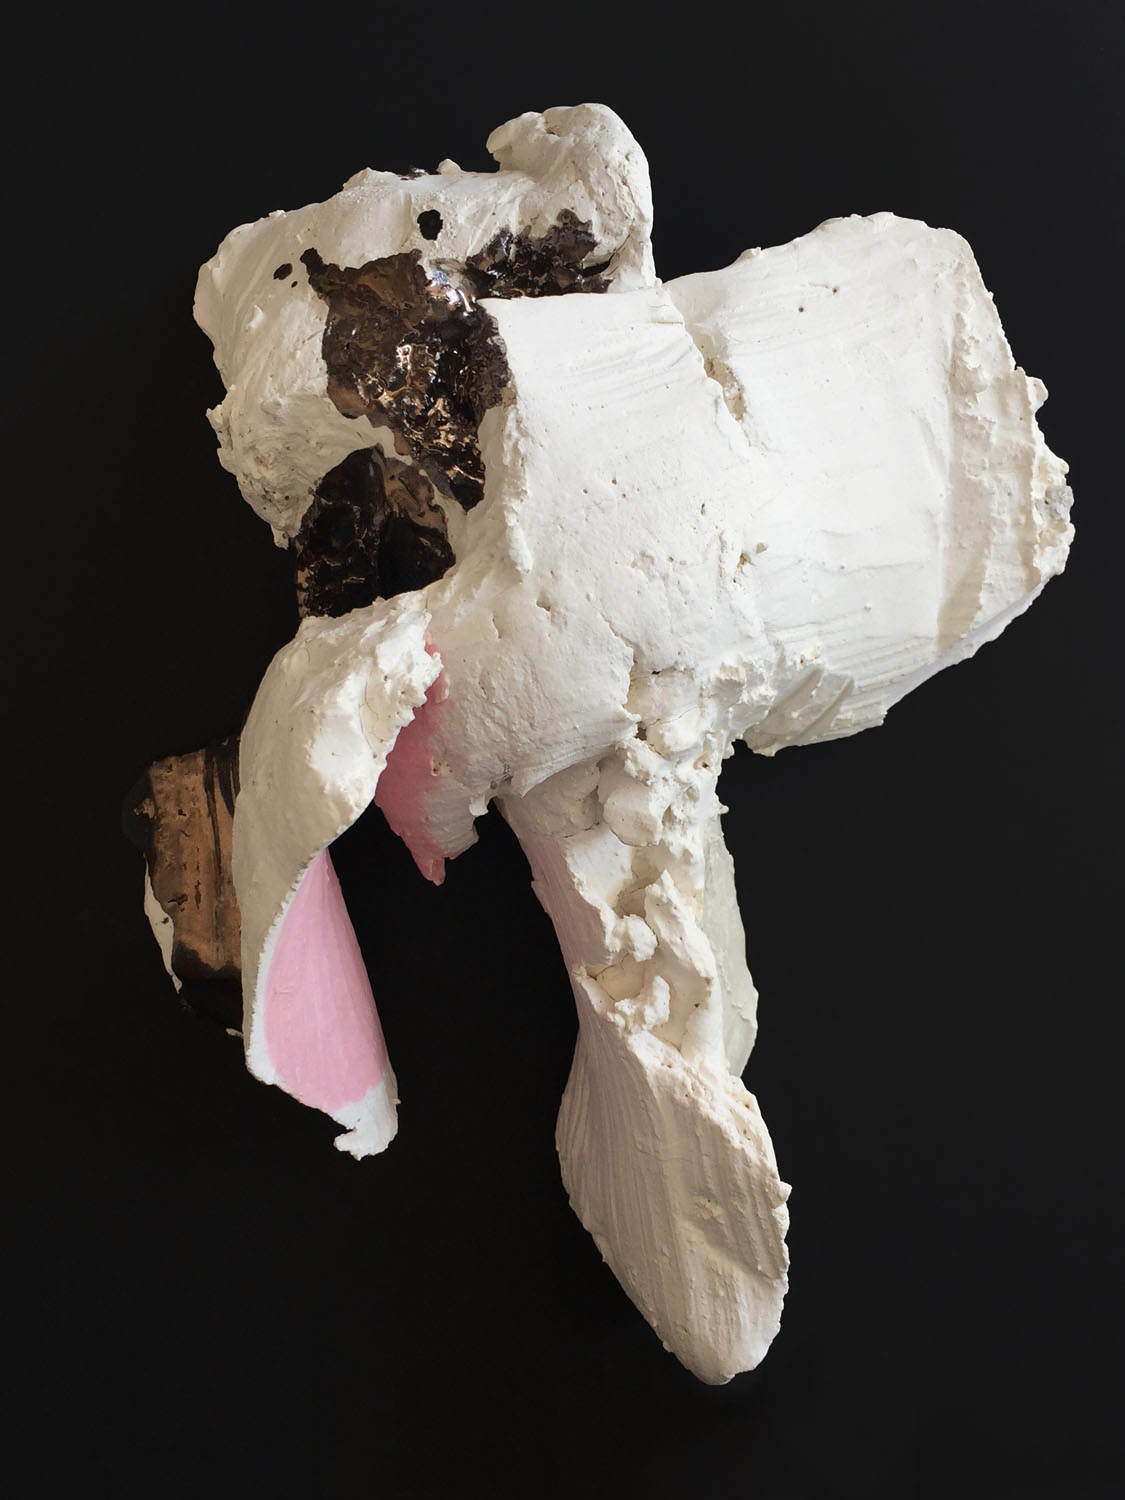   Gesture (Pink In The Recesses) , 2010, glazed ceramic, 10 x 5.5 x 11 inches 